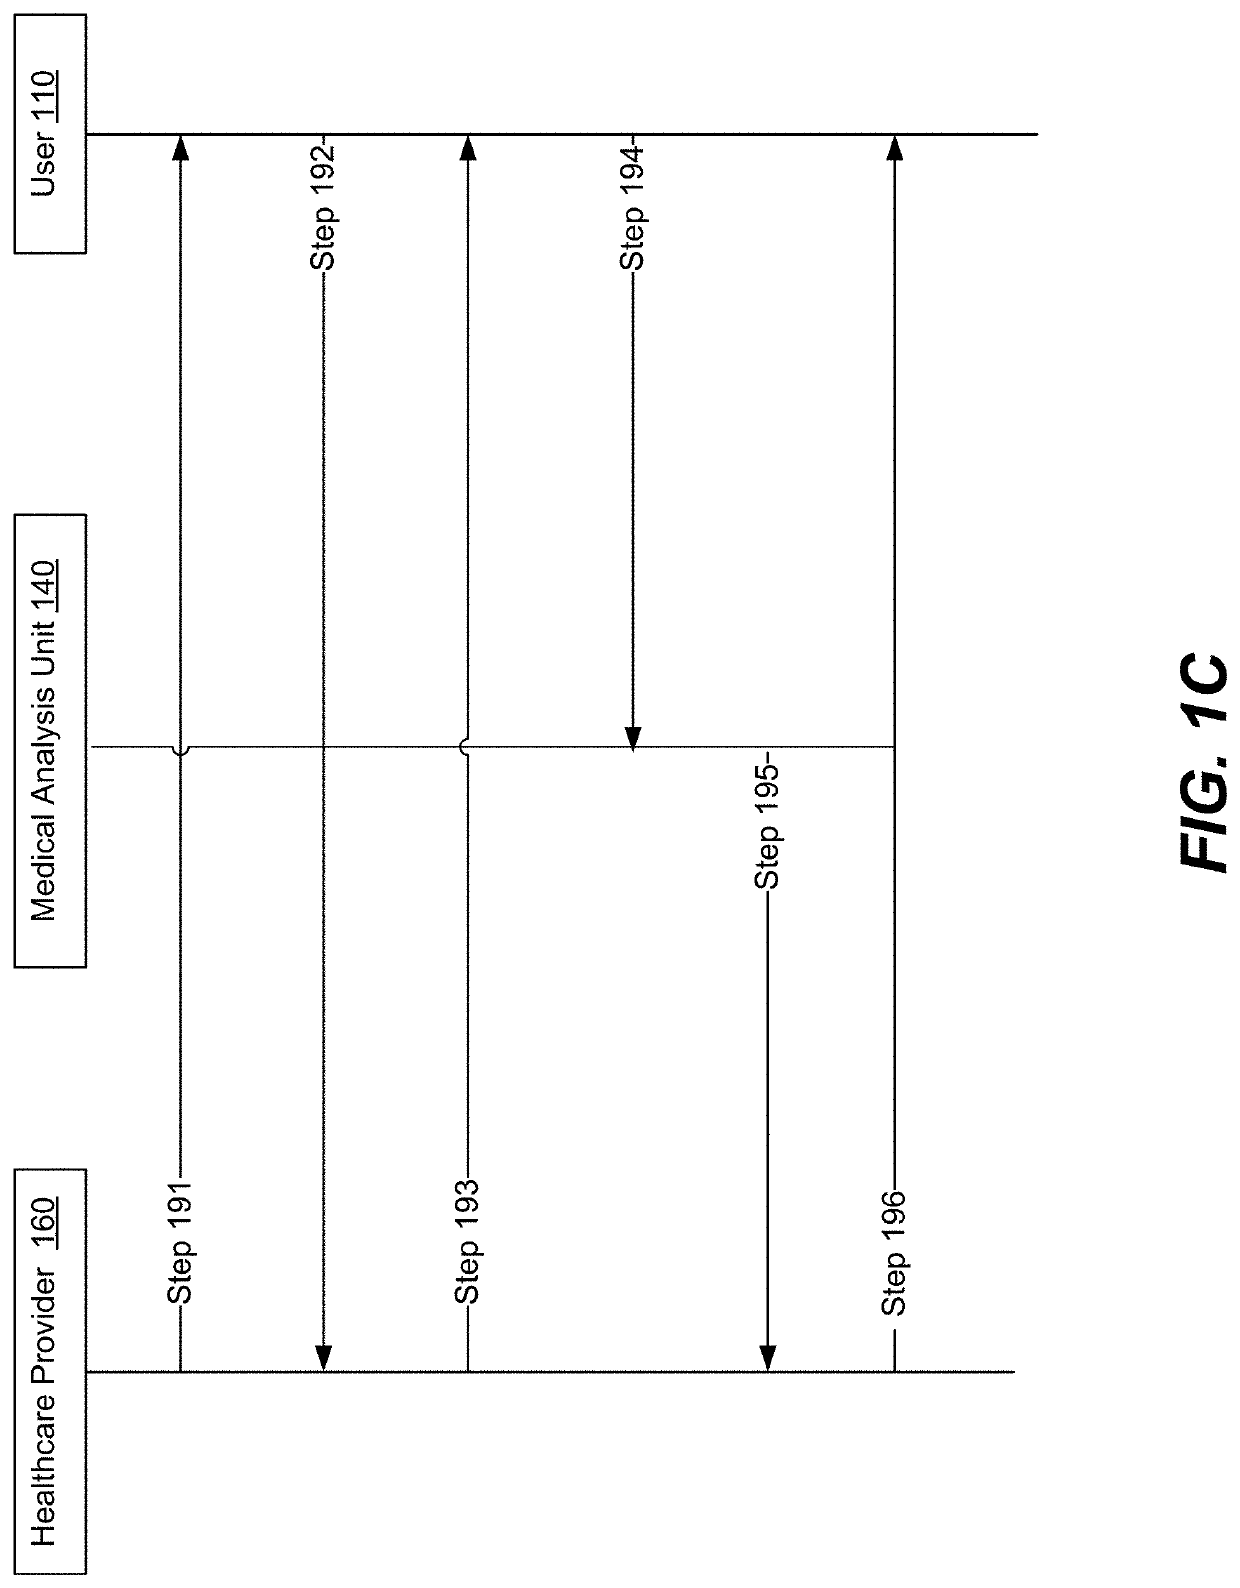 Systems and methods for urianlysis using a personal communications device